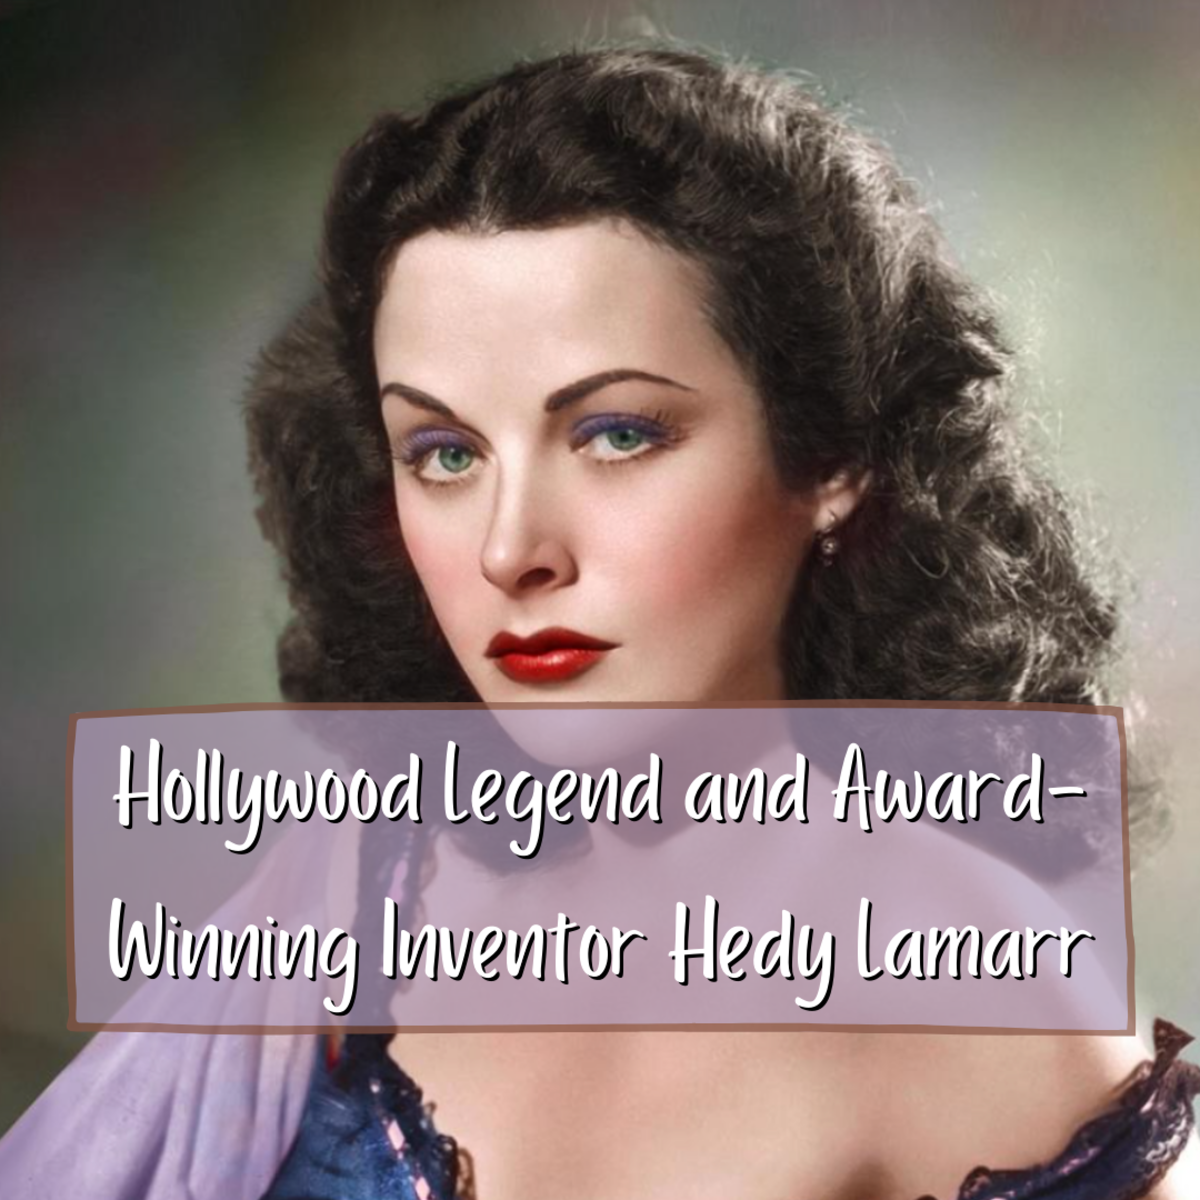 Hollywood Legend and Award-Winning Inventor Hedy Lamarr